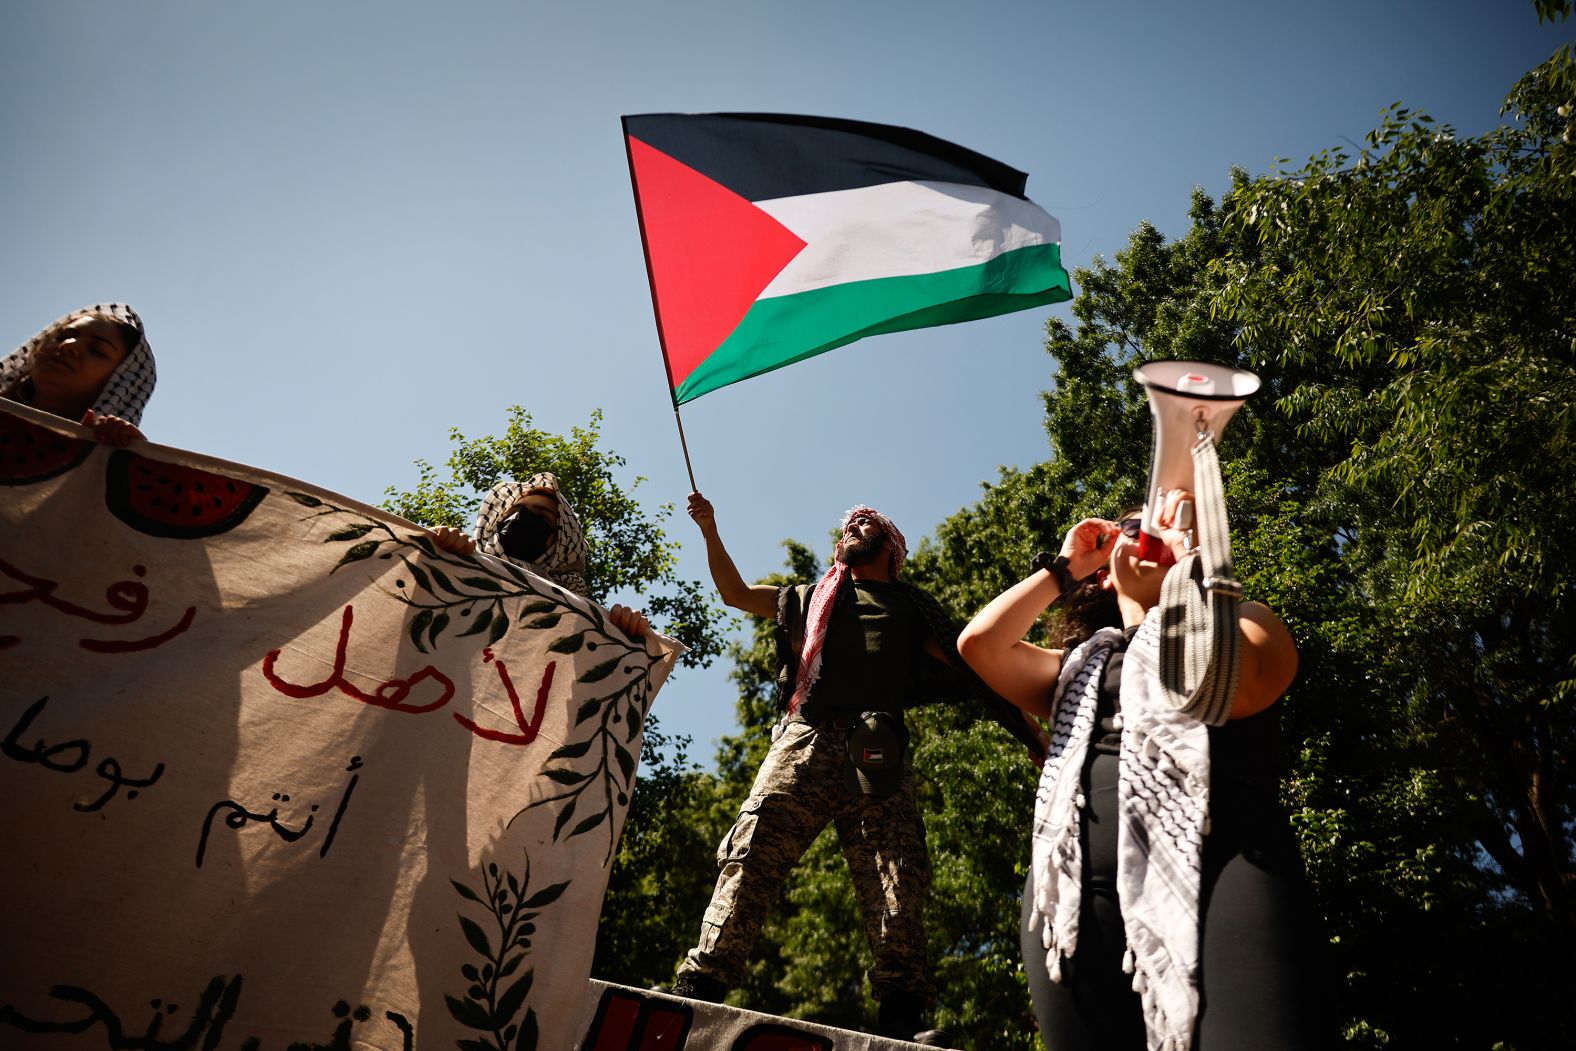 Pro-Palestinian protesters demonstrate on the George Washington University campus in Washington, DC, on May 2.